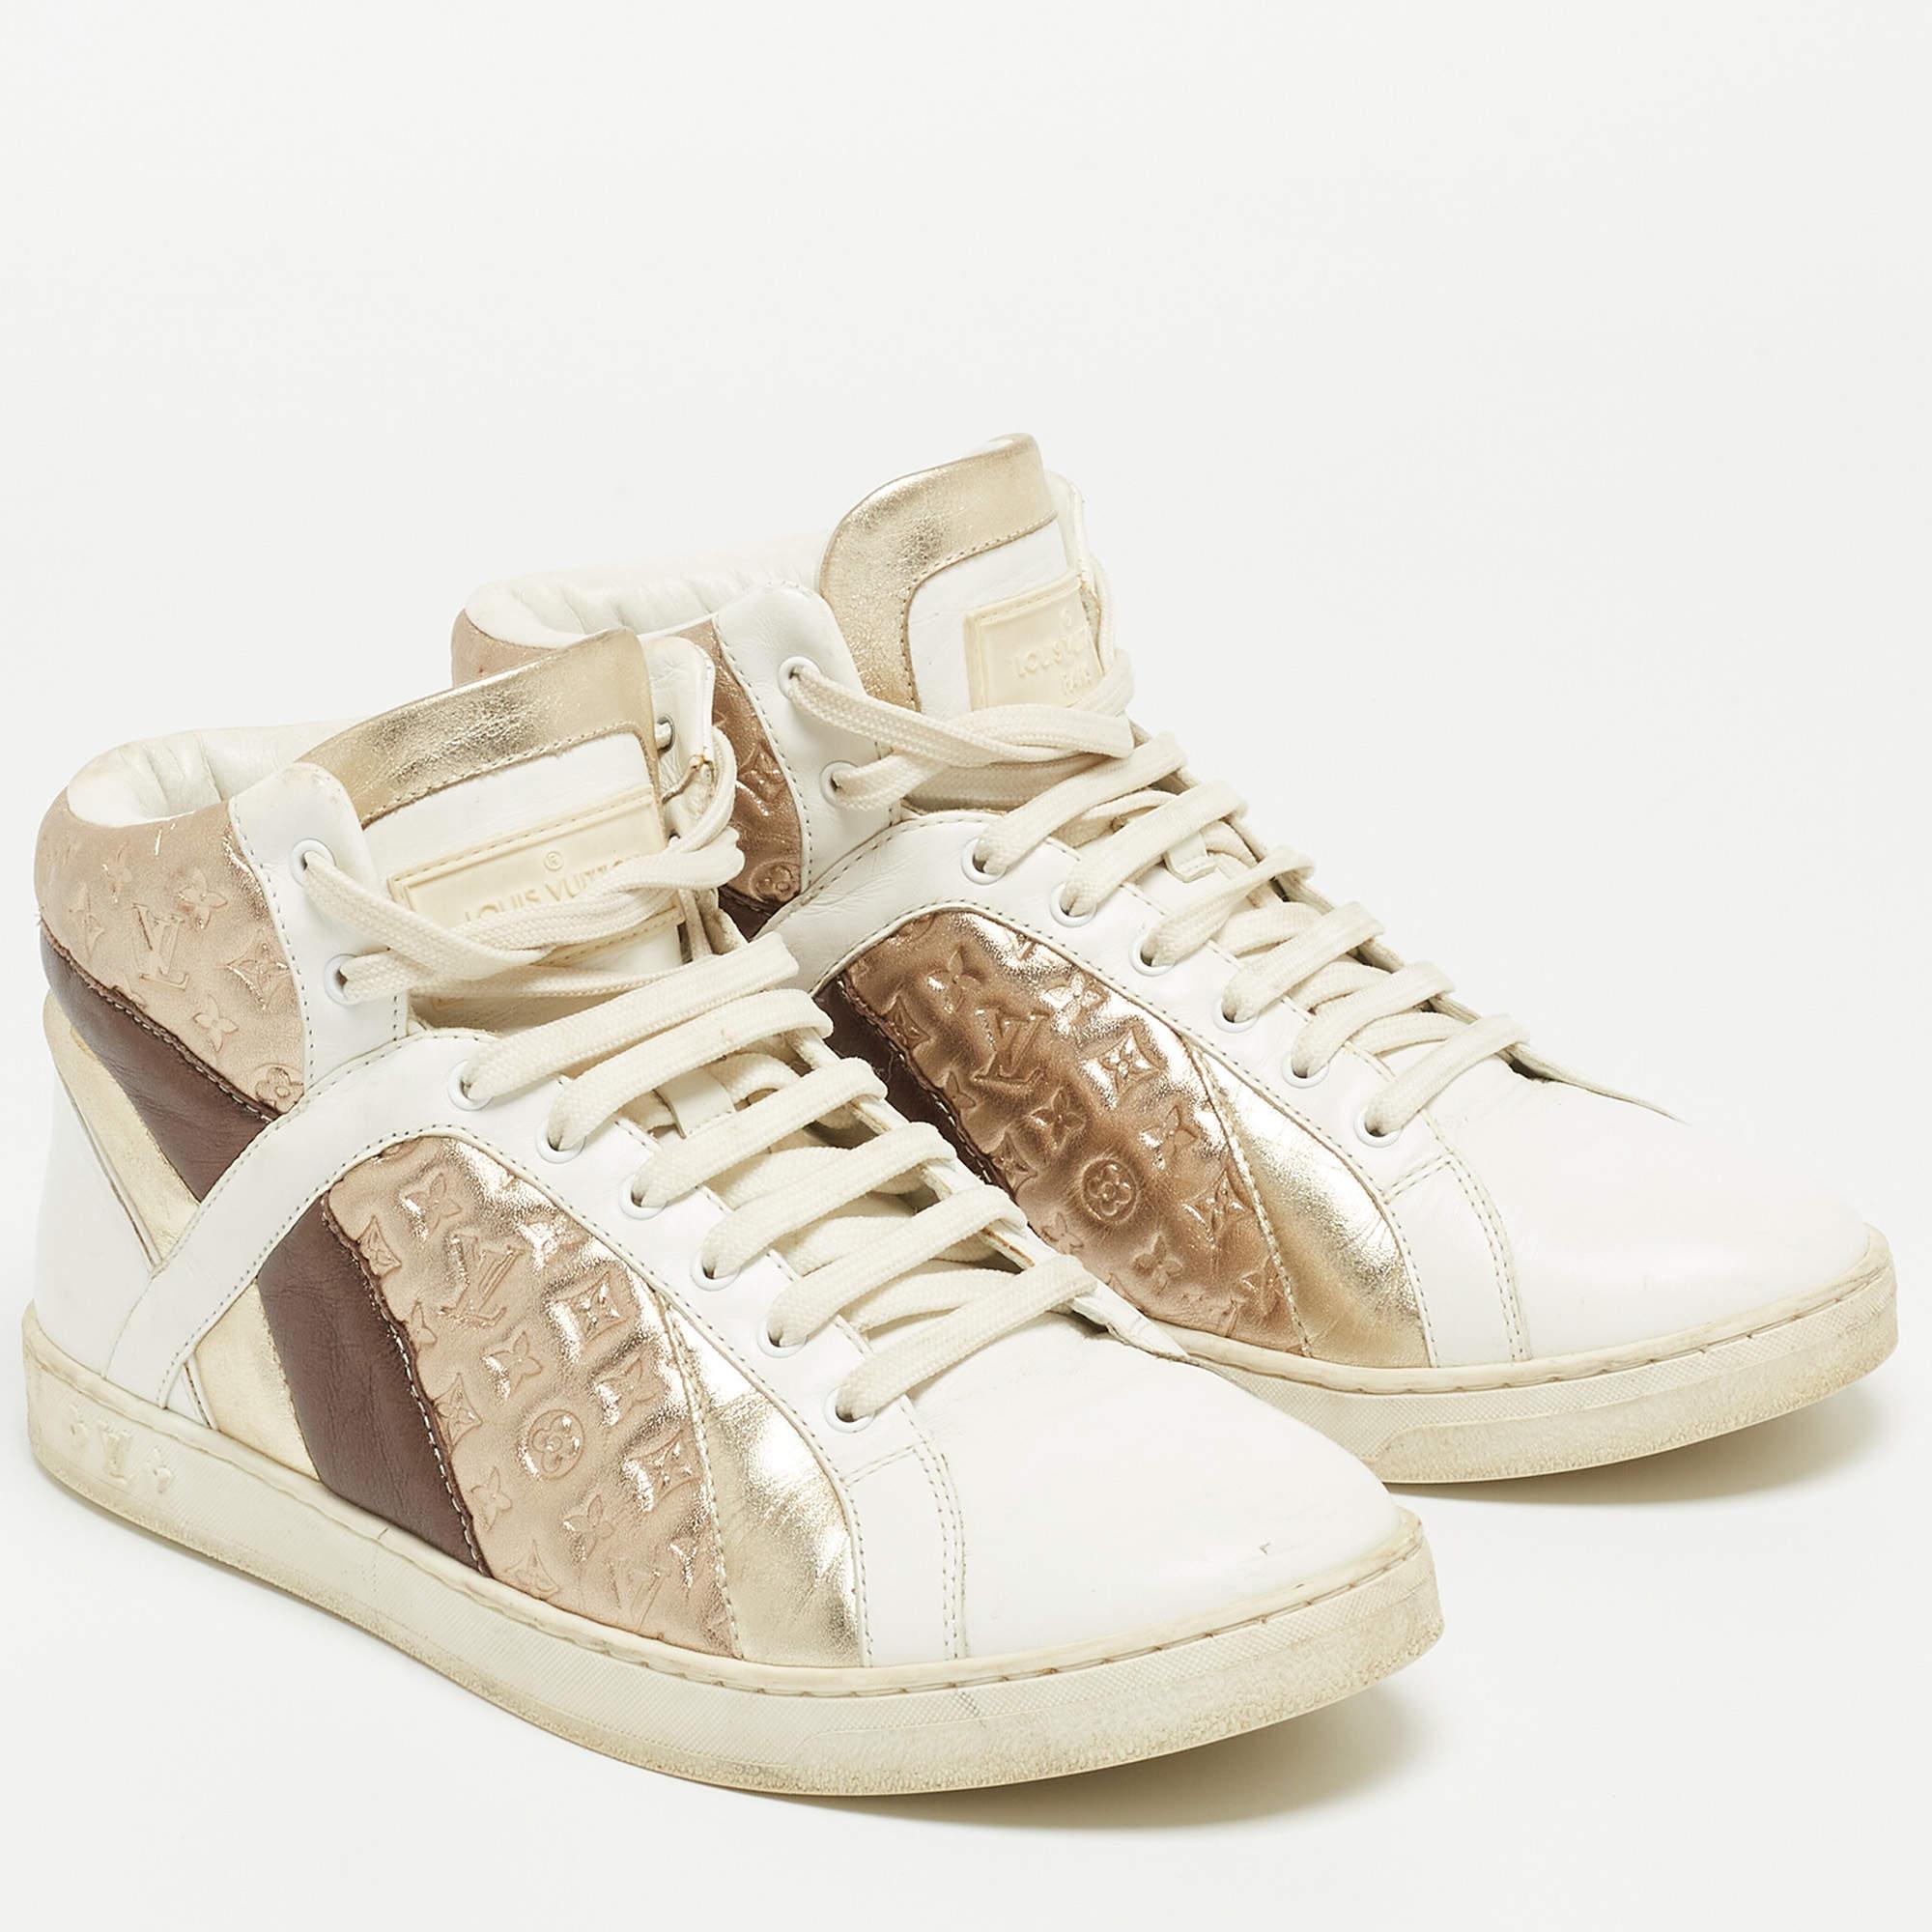 Louis Vuitton Metallic/White Leather and Canvas High Top Sneakers Size 38 In Fair Condition For Sale In Dubai, Al Qouz 2